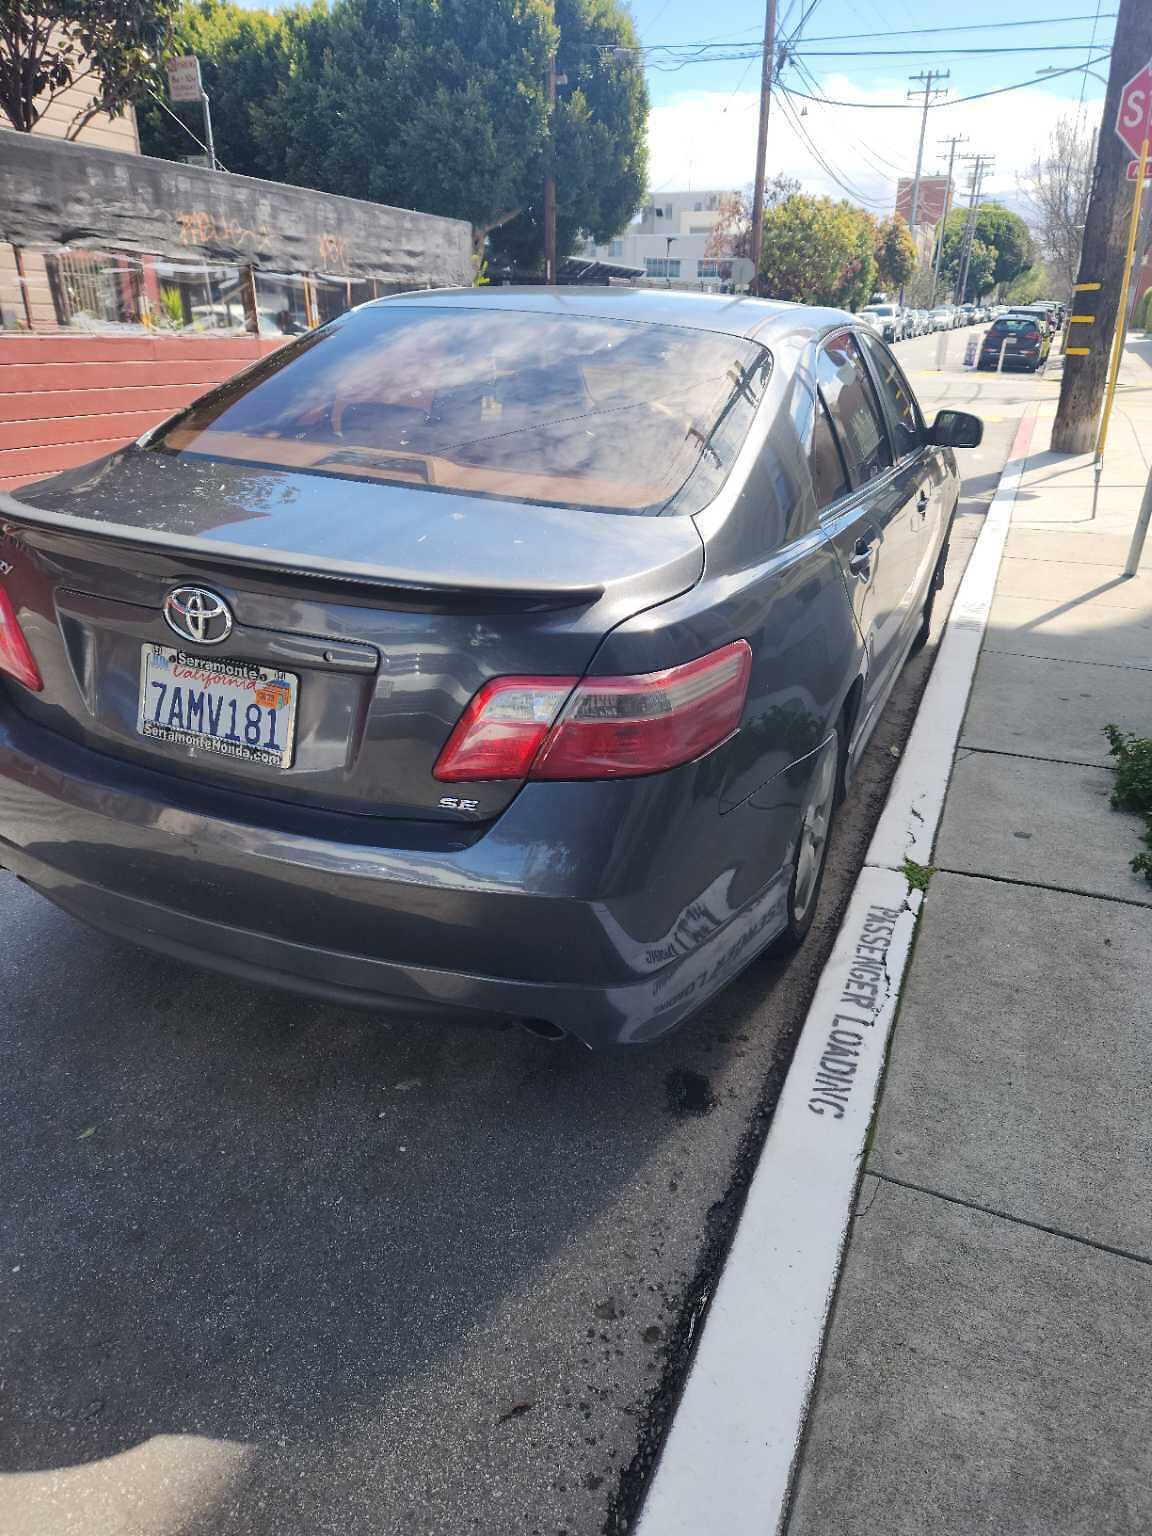 Photo of car in the street with license plate 7AMV181 in California